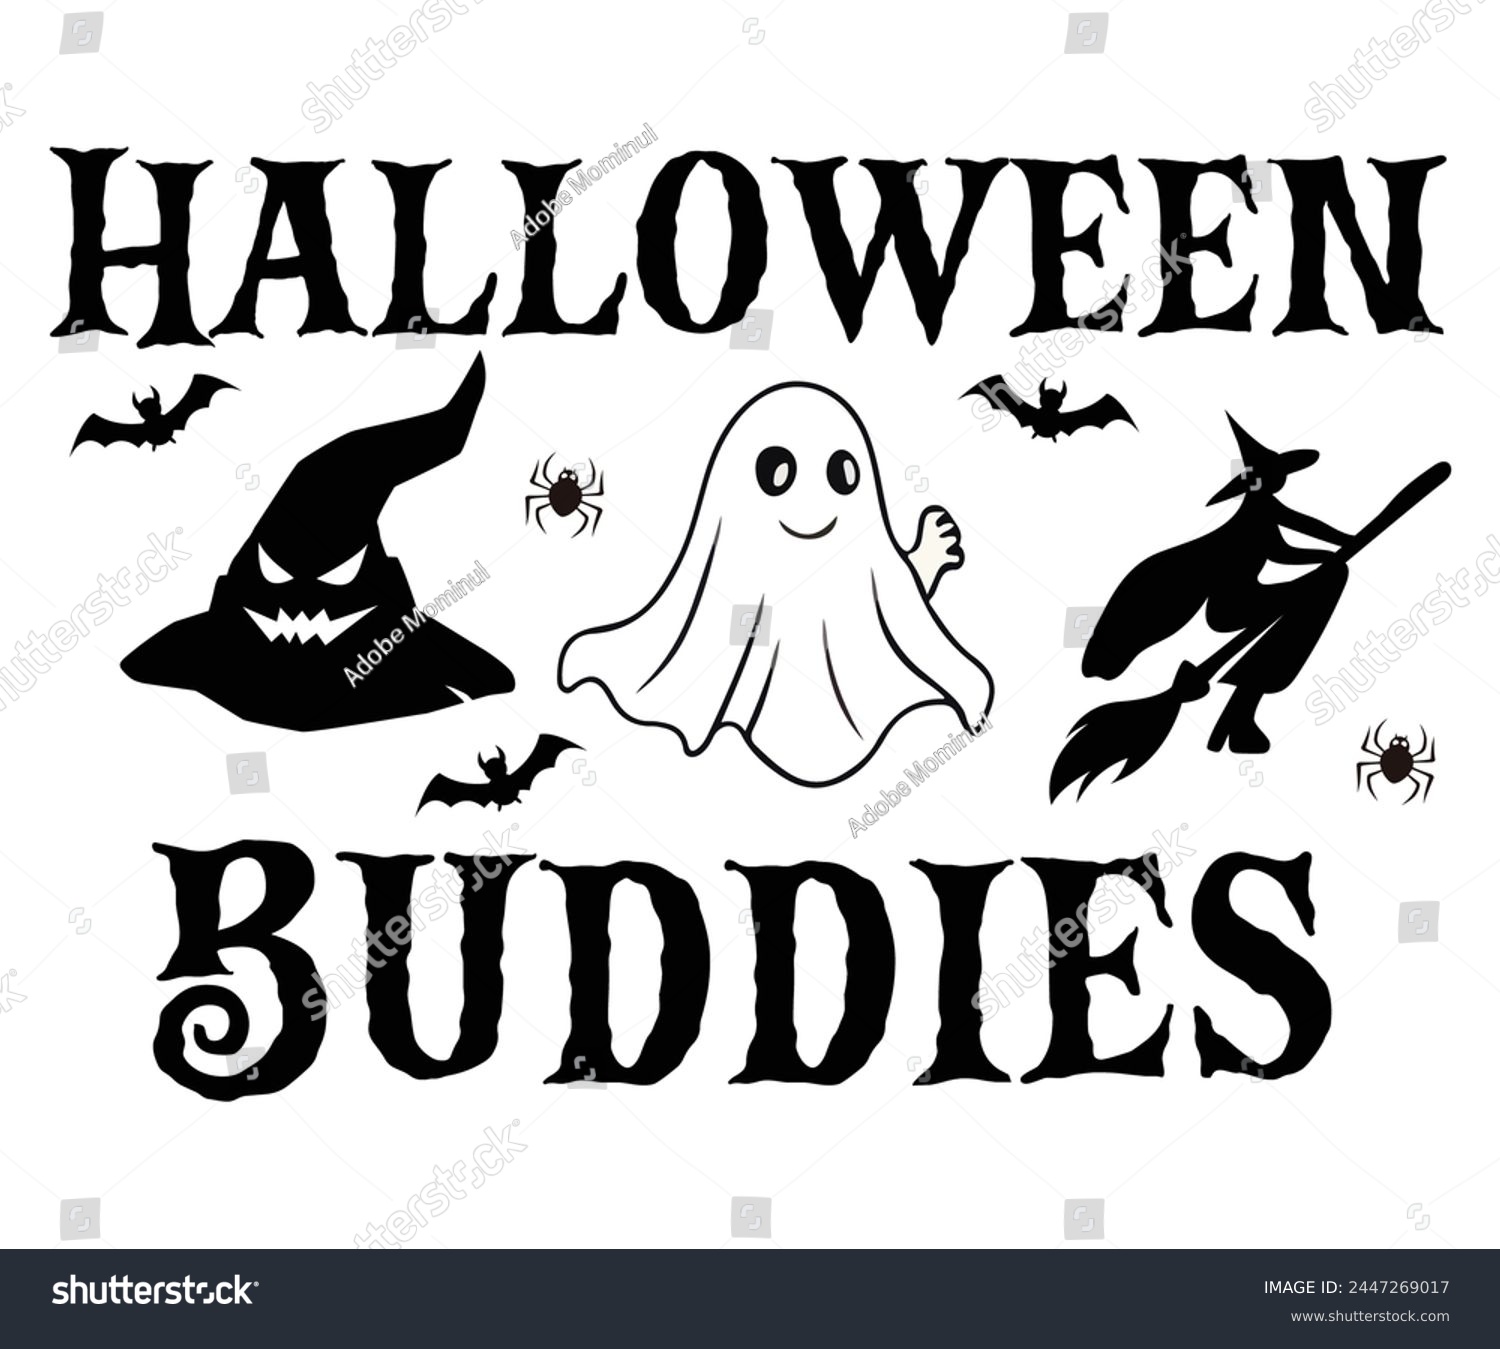 SVG of Halloween Buddies,Halloween Svg,Typography,Halloween Quotes,Witches Svg,Halloween Party,Halloween Costume,Halloween Gift,Funny Halloween,Spooky Svg,Funny T shirt,Ghost Svg,Cut file svg